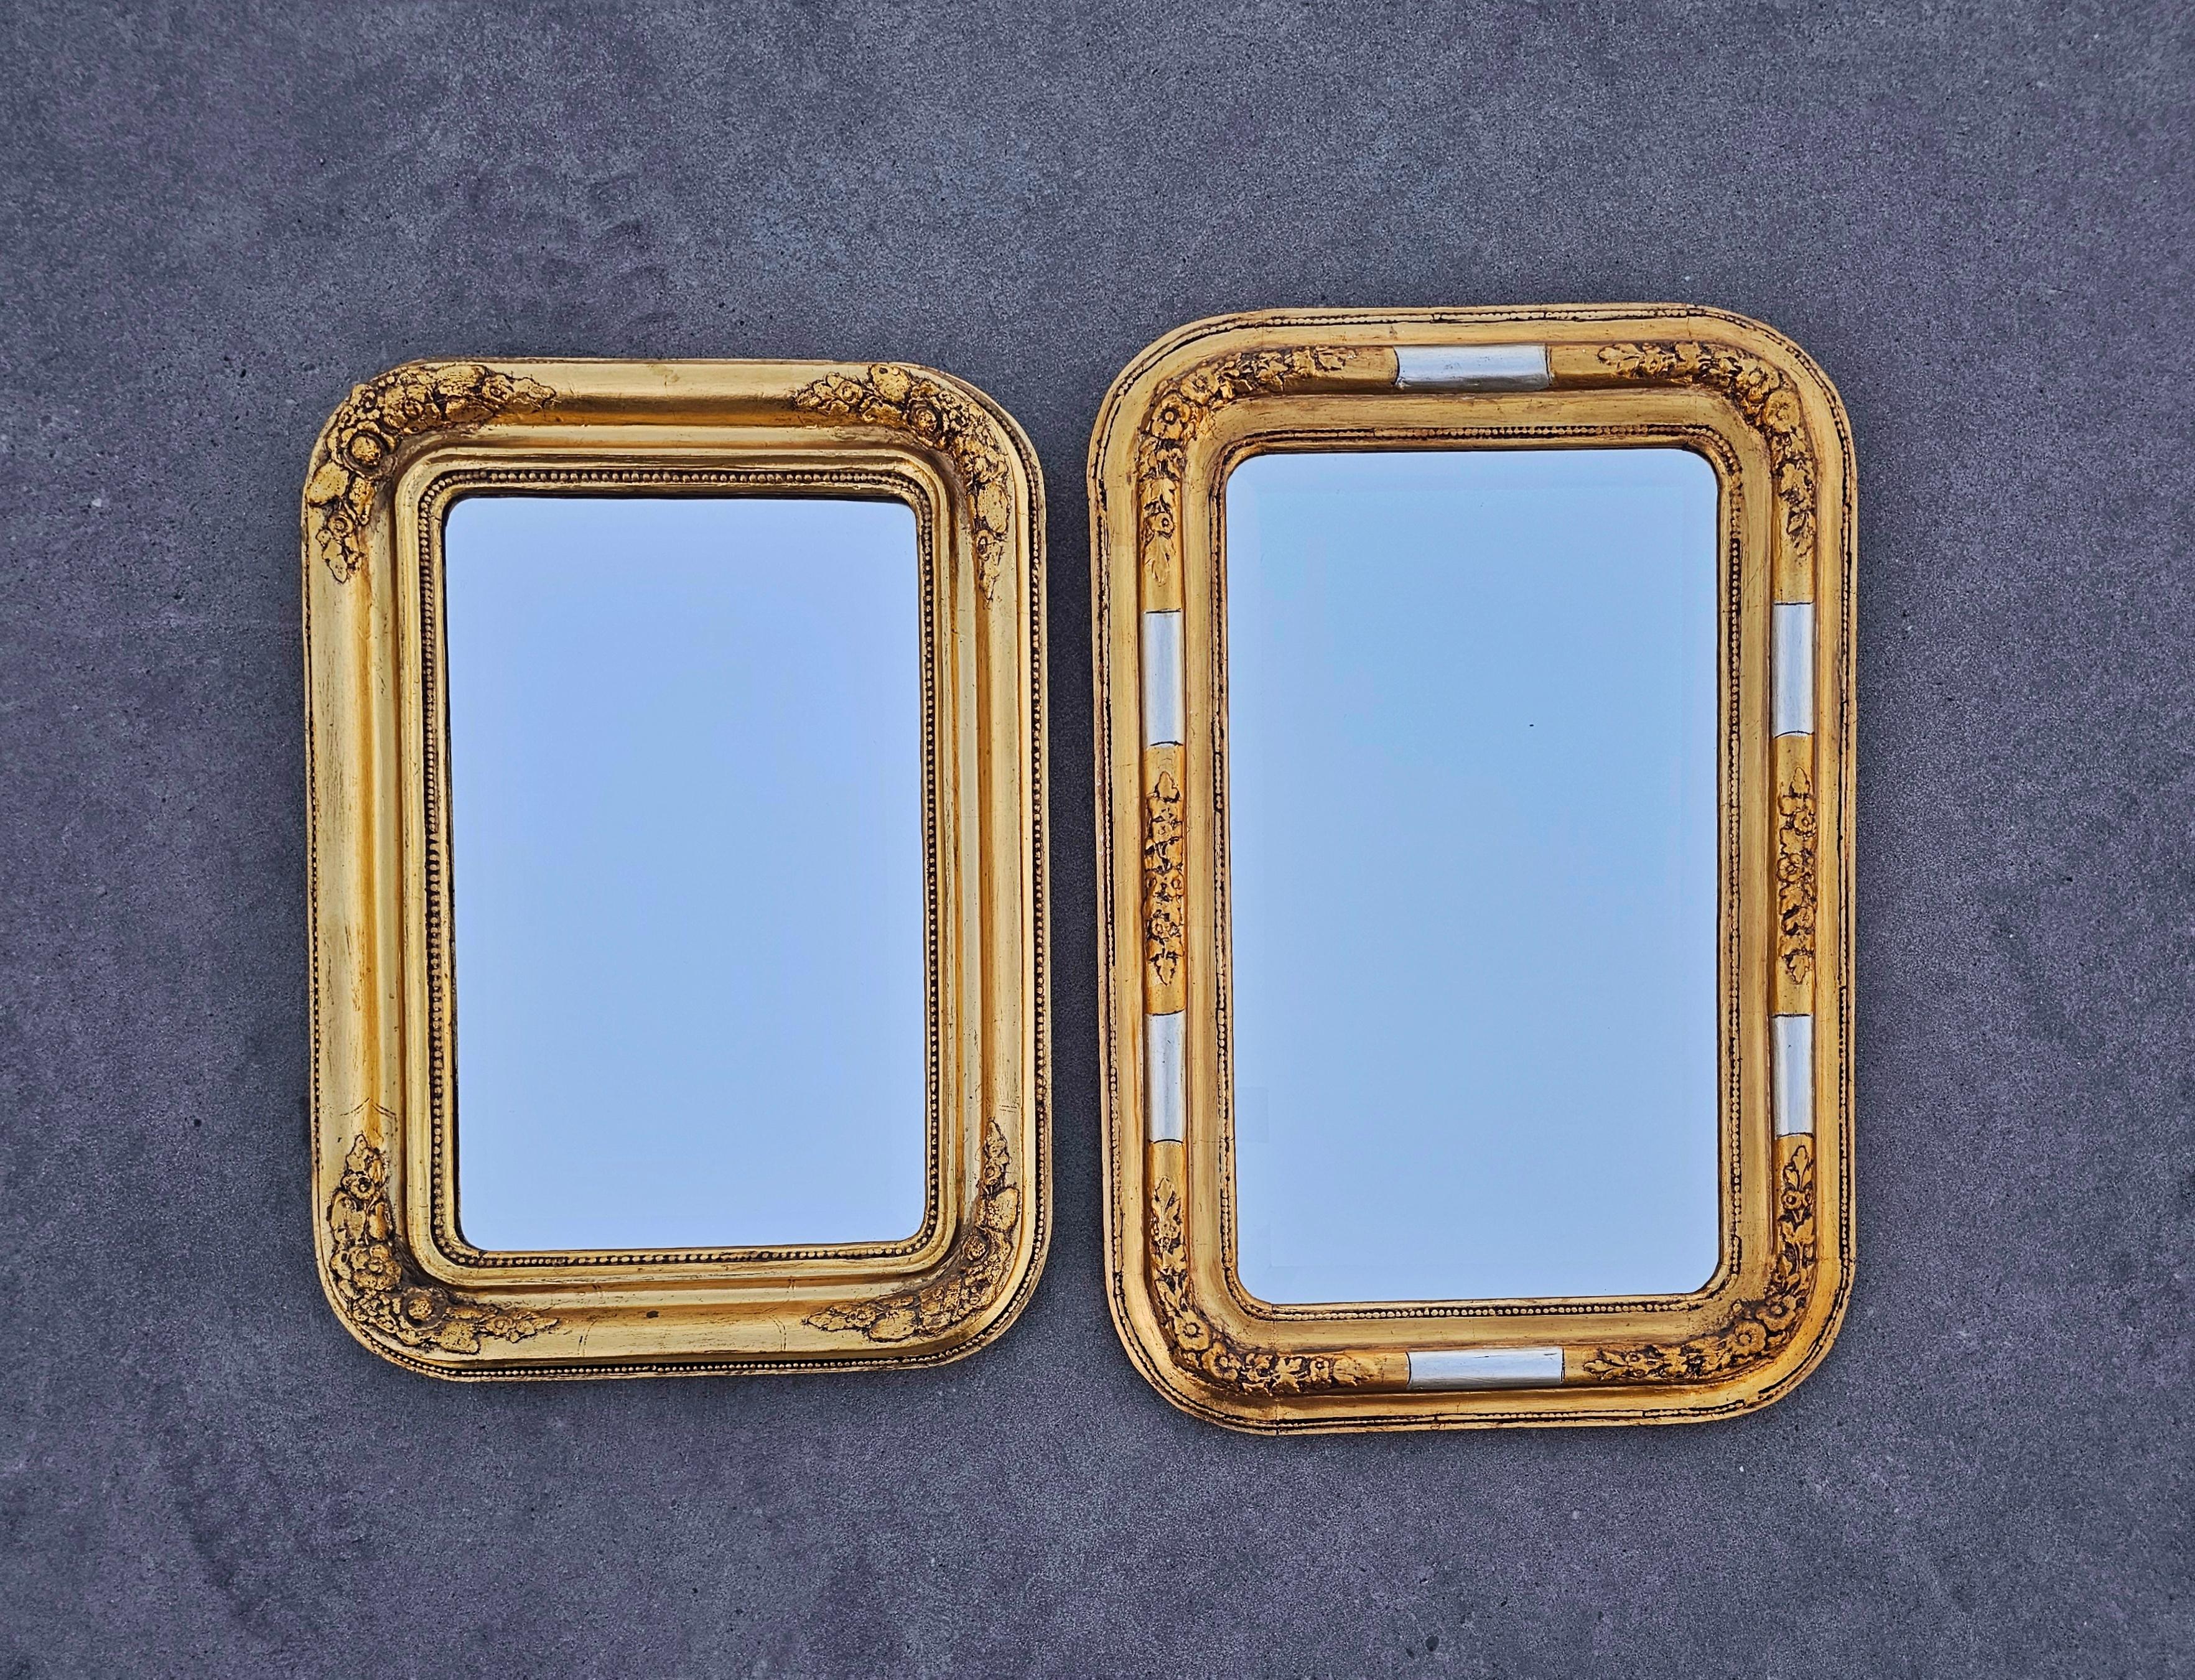 In this listing you will find a gorgeous, large and rare Biedermeier Mirror with gilt wood frame and faceted mirror glass. It features a rectangular shape with rounded corners and floral decorative carvings. The mirror is faceted. Made in Austria